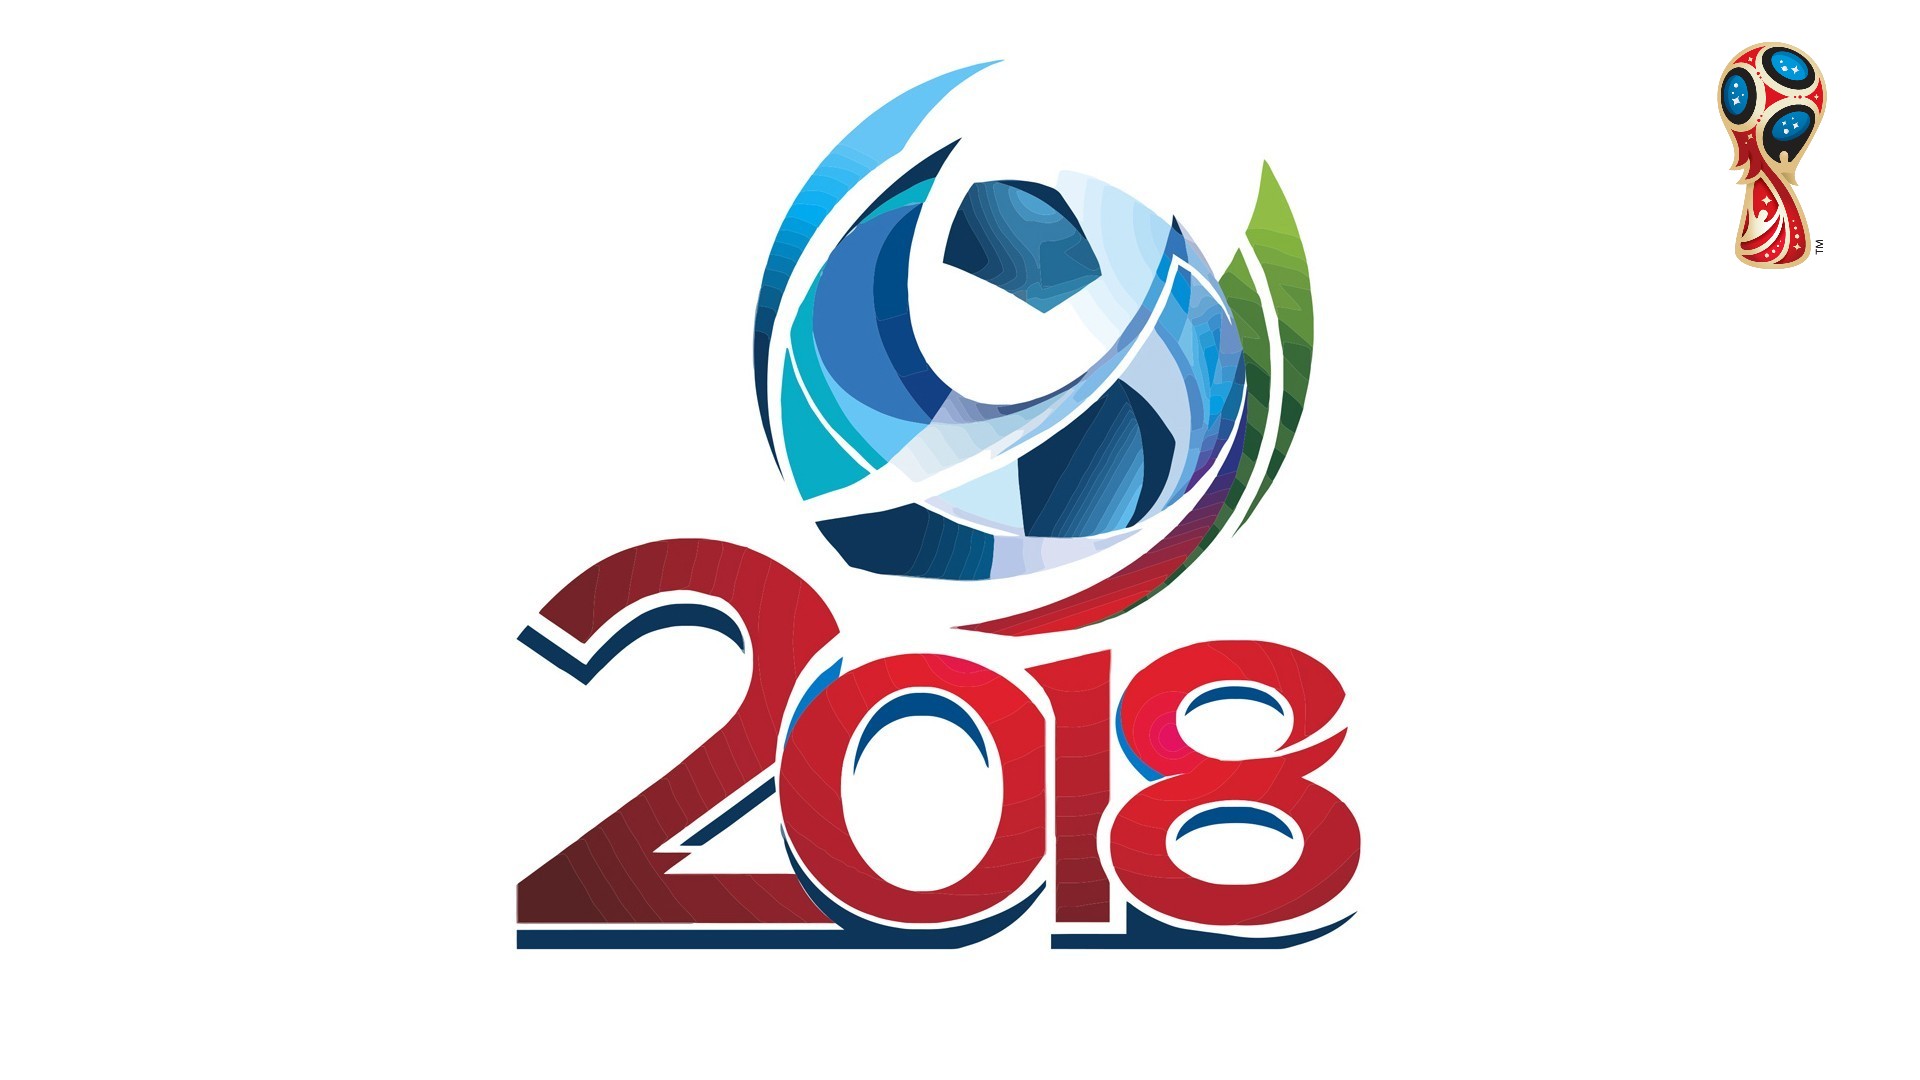 World Cup Russia Desktop Wallpapers With Resolution 1920X1080 pixel. You can make this wallpaper for your Mac or Windows Desktop Background, iPhone, Android or Tablet and another Smartphone device for free